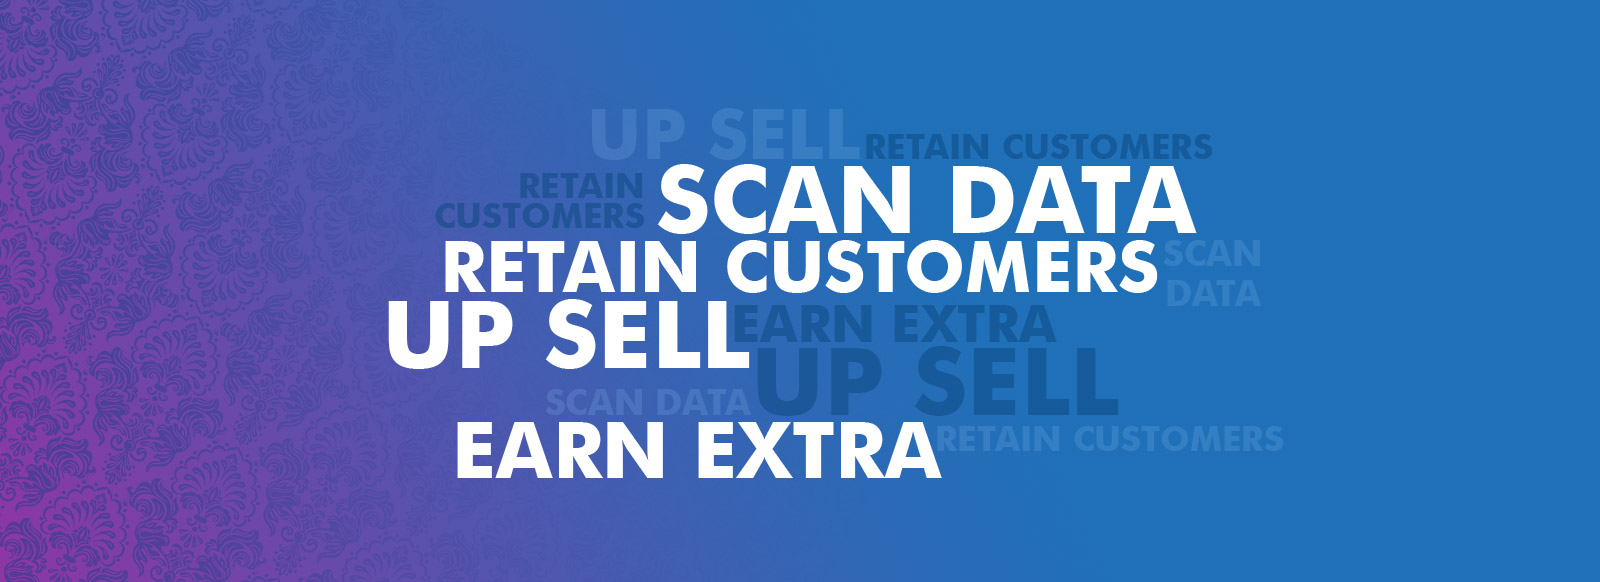 SCAN DATA - UP SELL